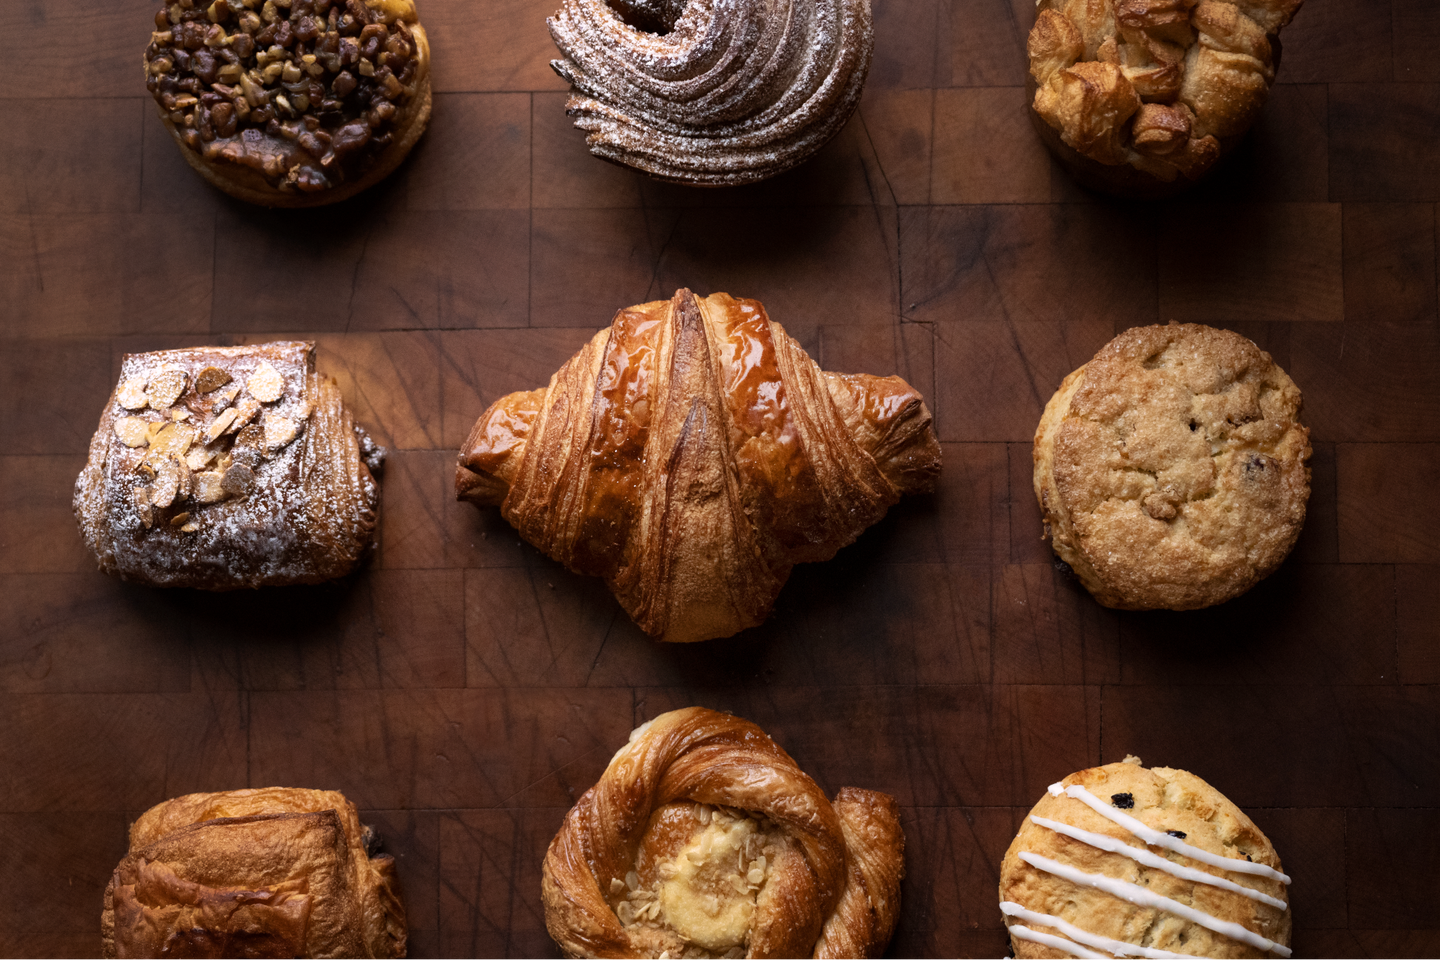 How a 40-Year-Old Hudson Valley Bakery Is Reimagining Itself for the Future